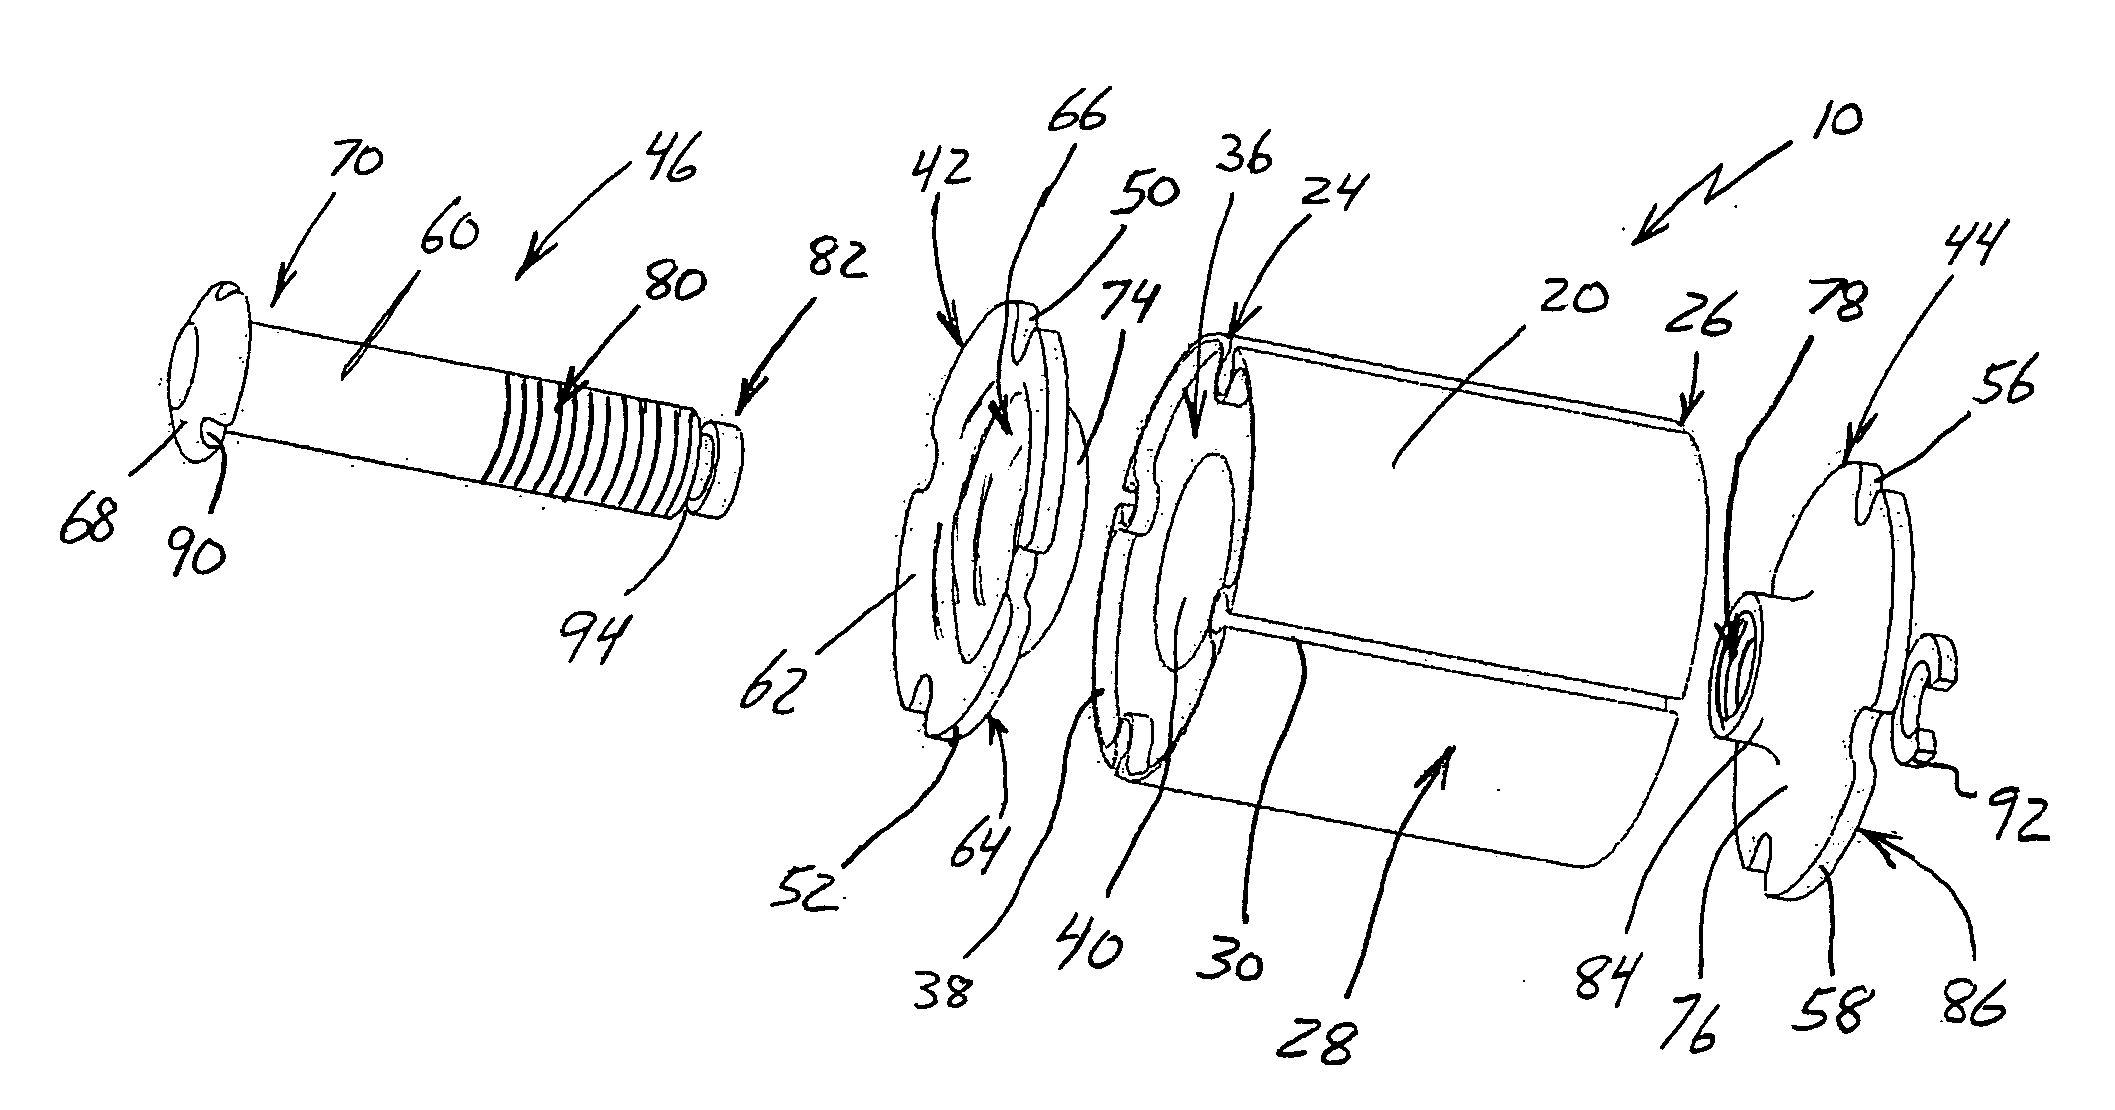 Tamper resistant plug to prevent removal of wire from a conduit